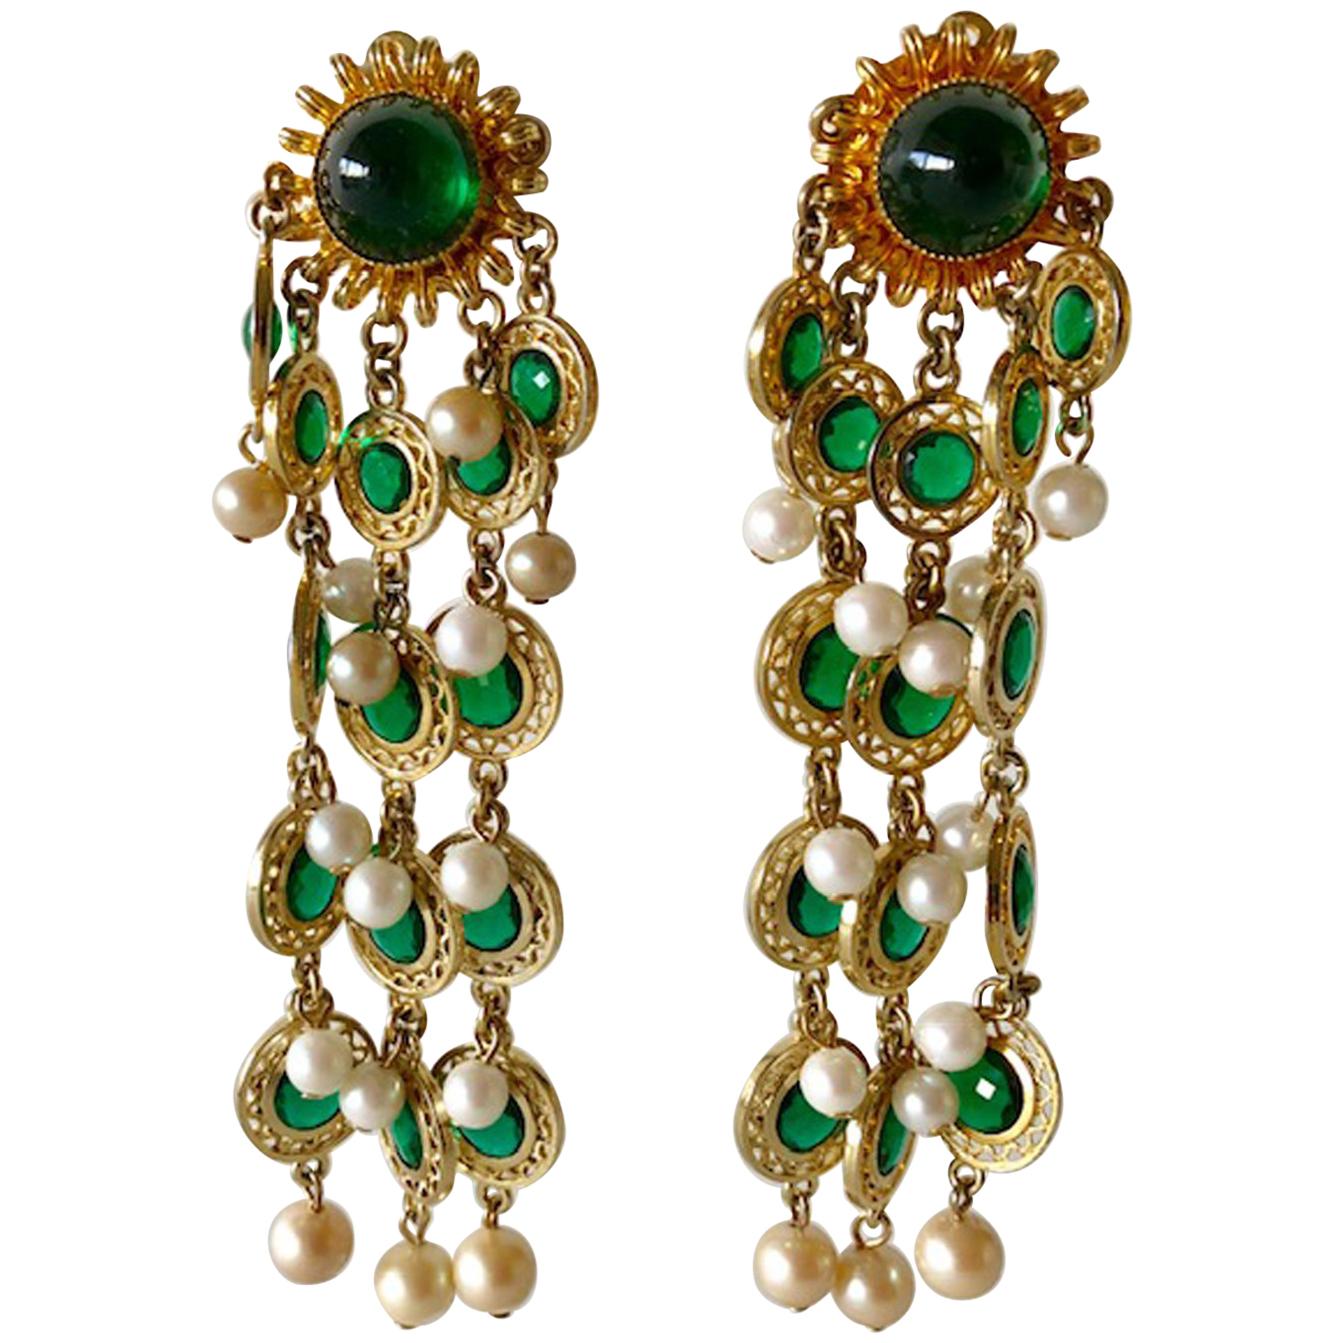 Vintage Faux Emerald and Pearl Fringe Statement Earrings 